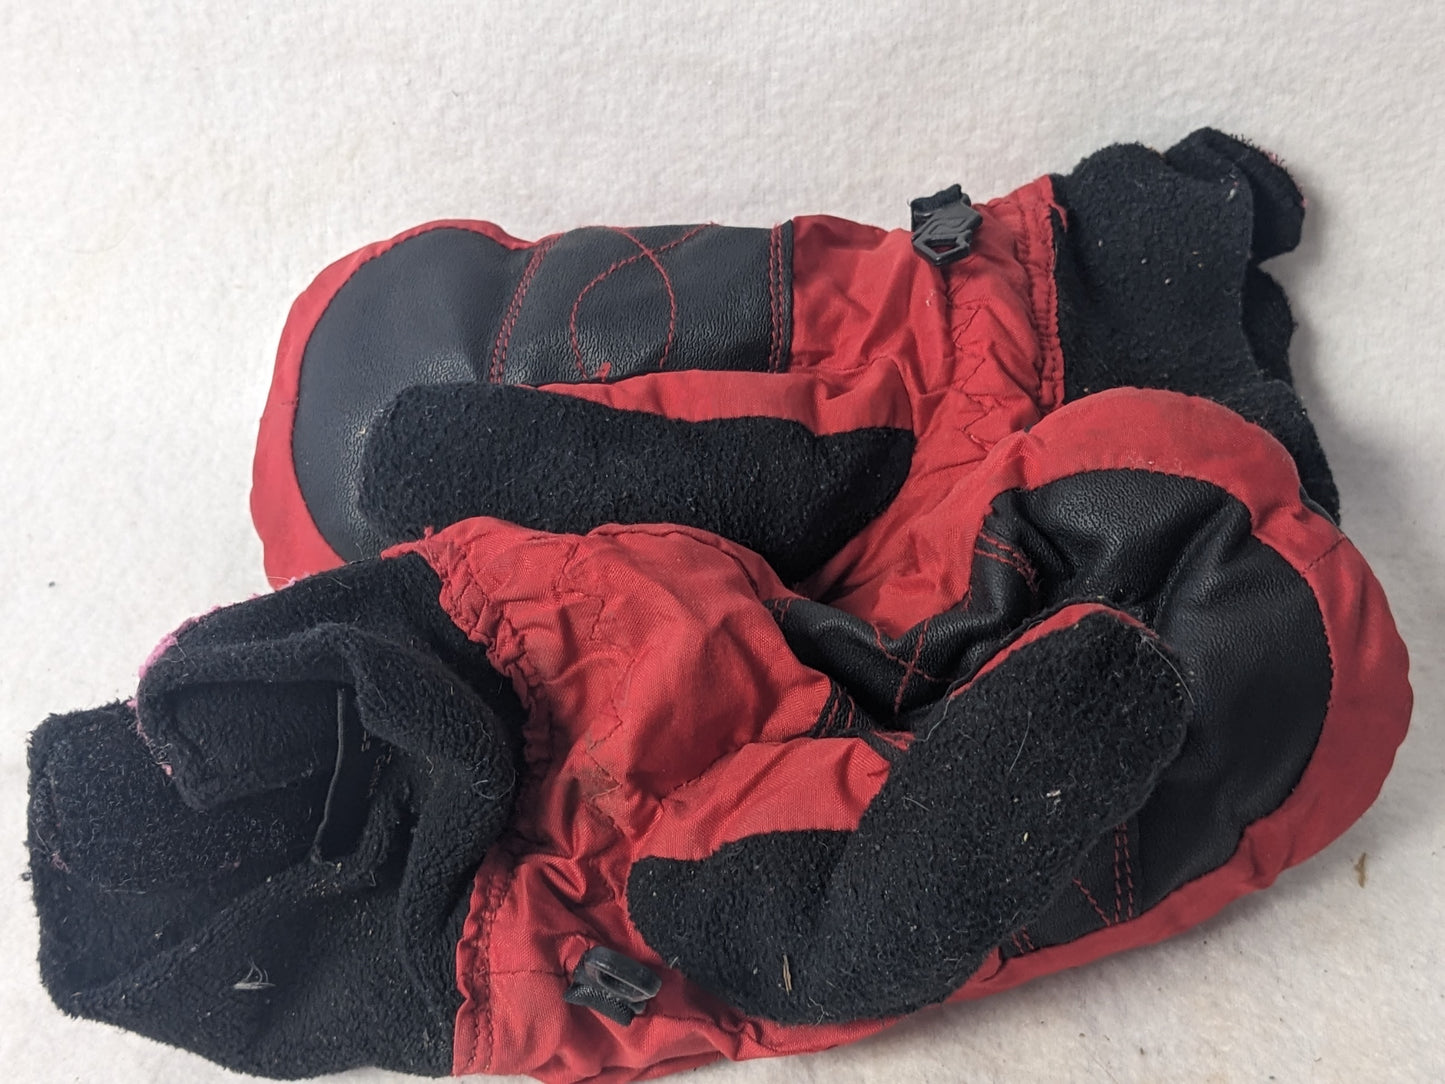 Kombi Youth Winter Mittens Size Youth Medium Color Red Condition Used